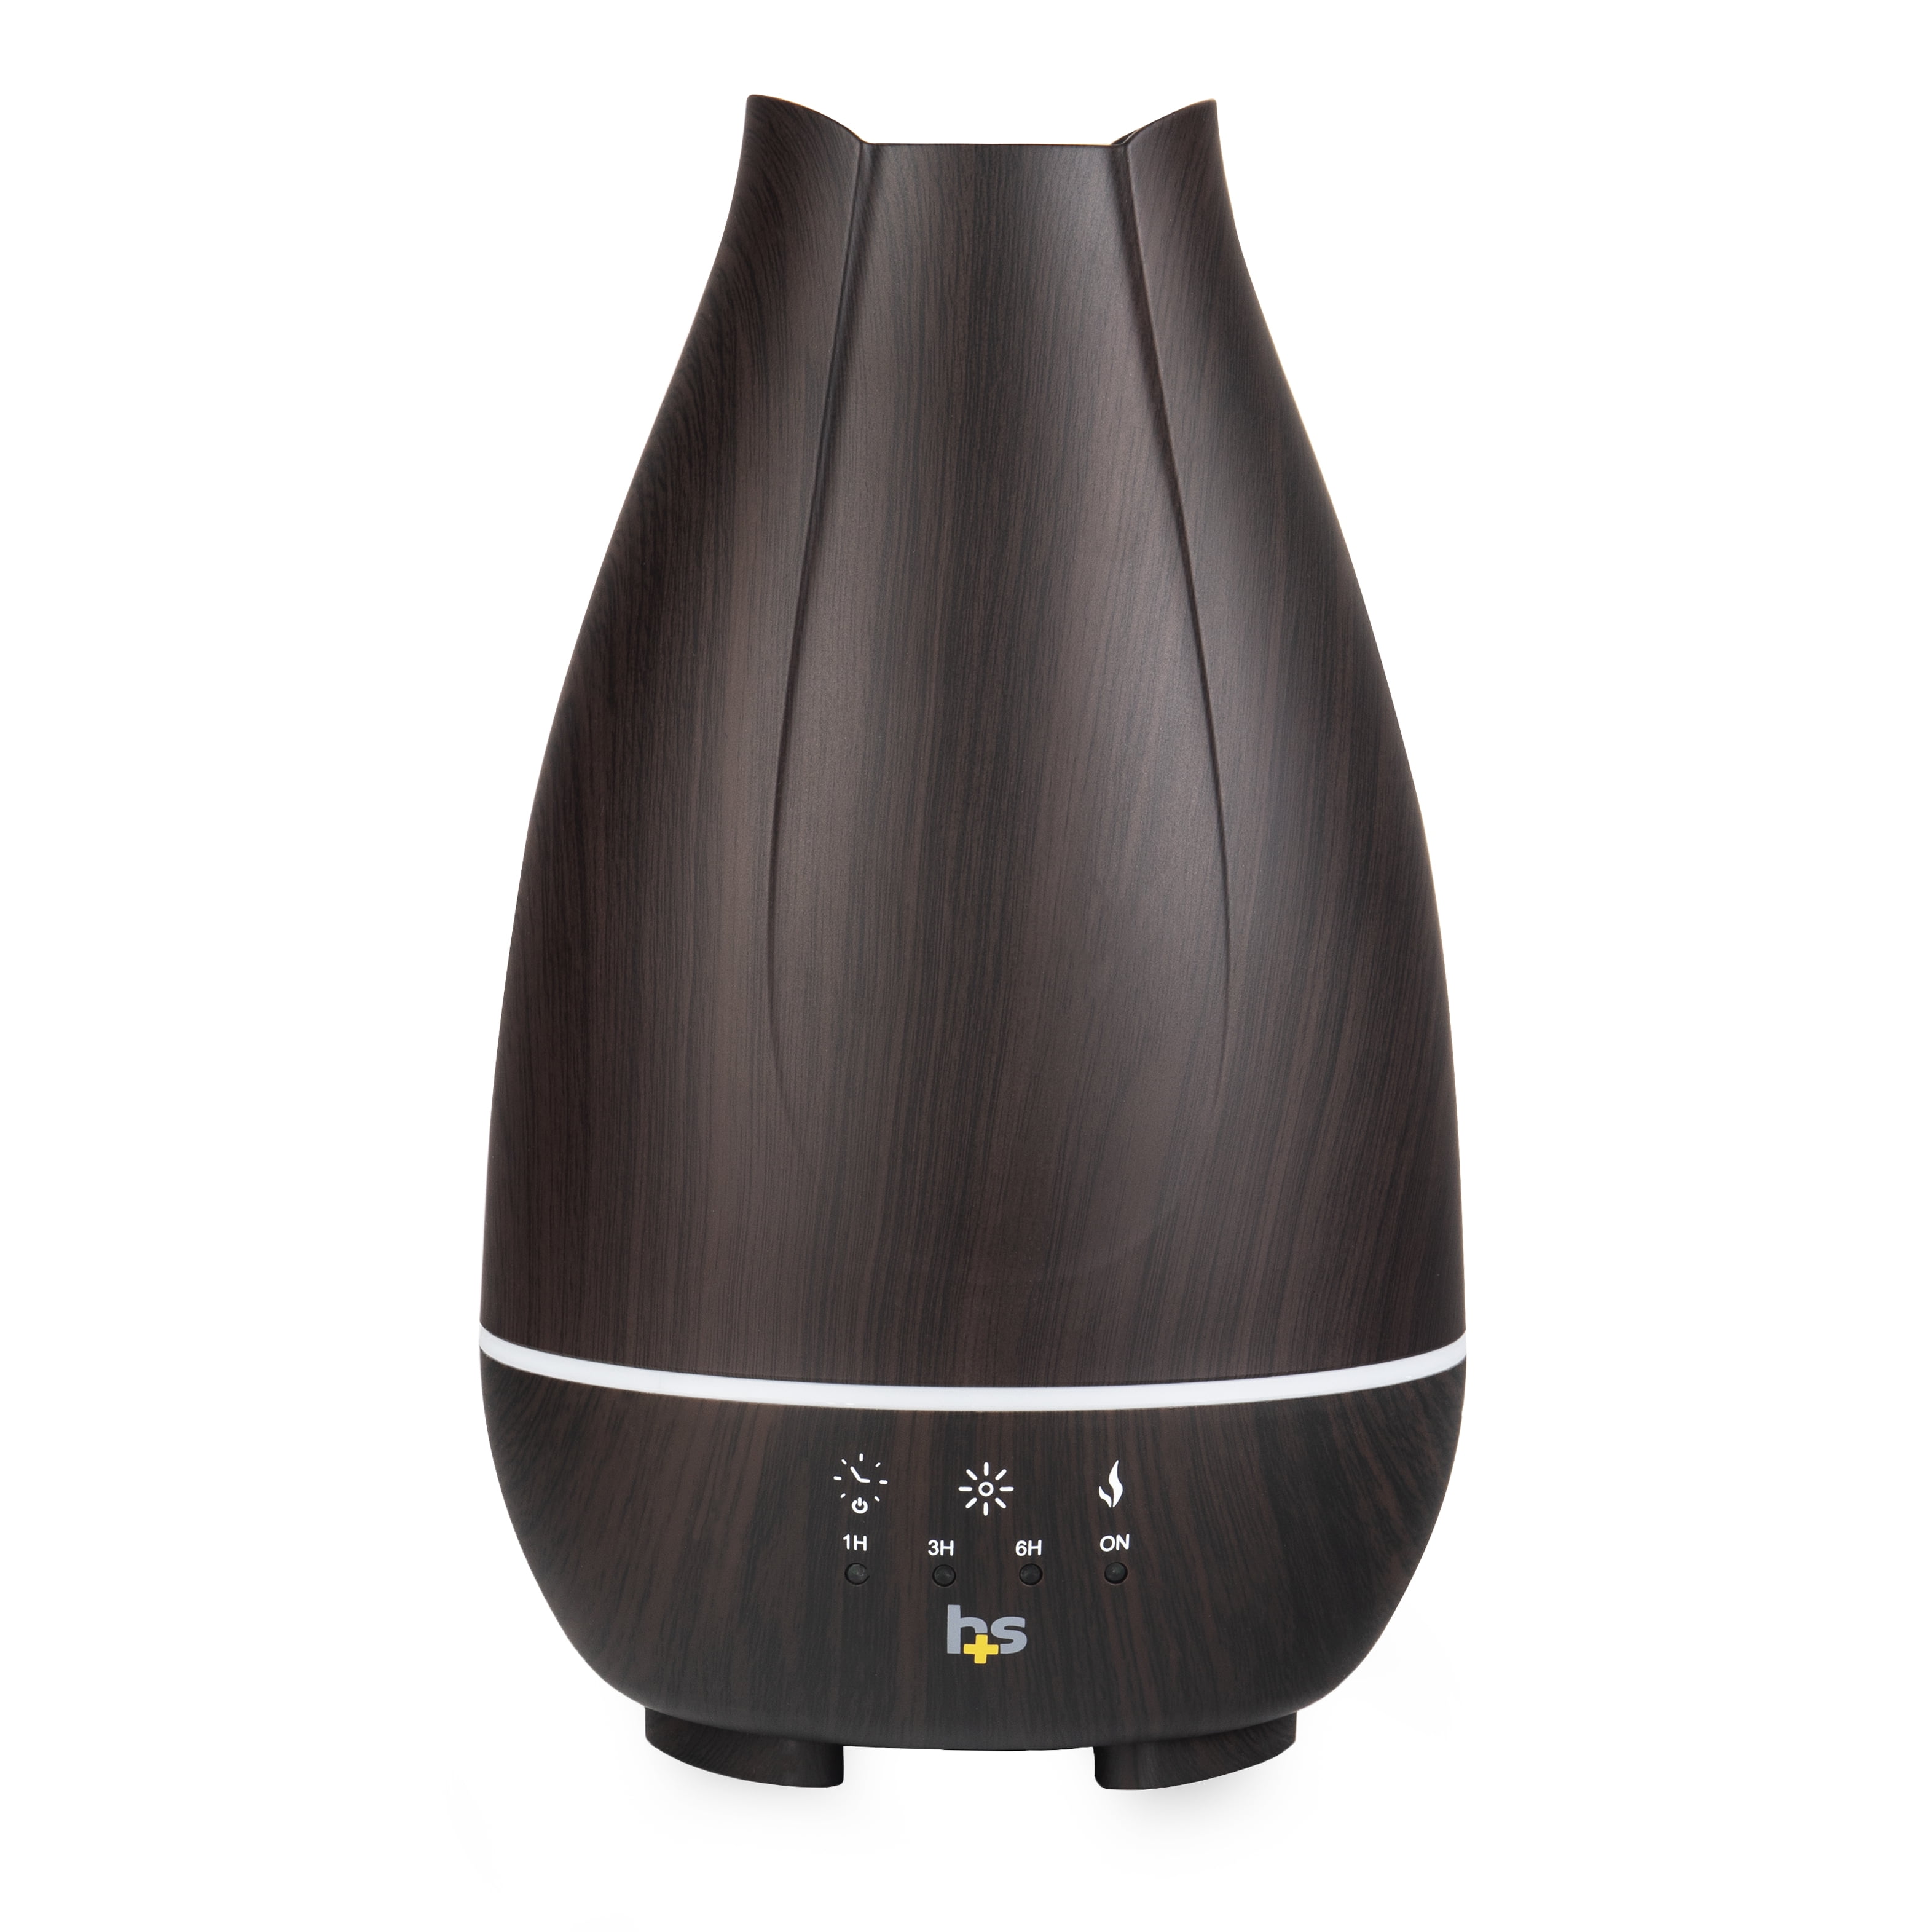 7 LED 500ml Essential Oil Humidifier Aroma Air Aromatherapy Diffuser Cool Mist 